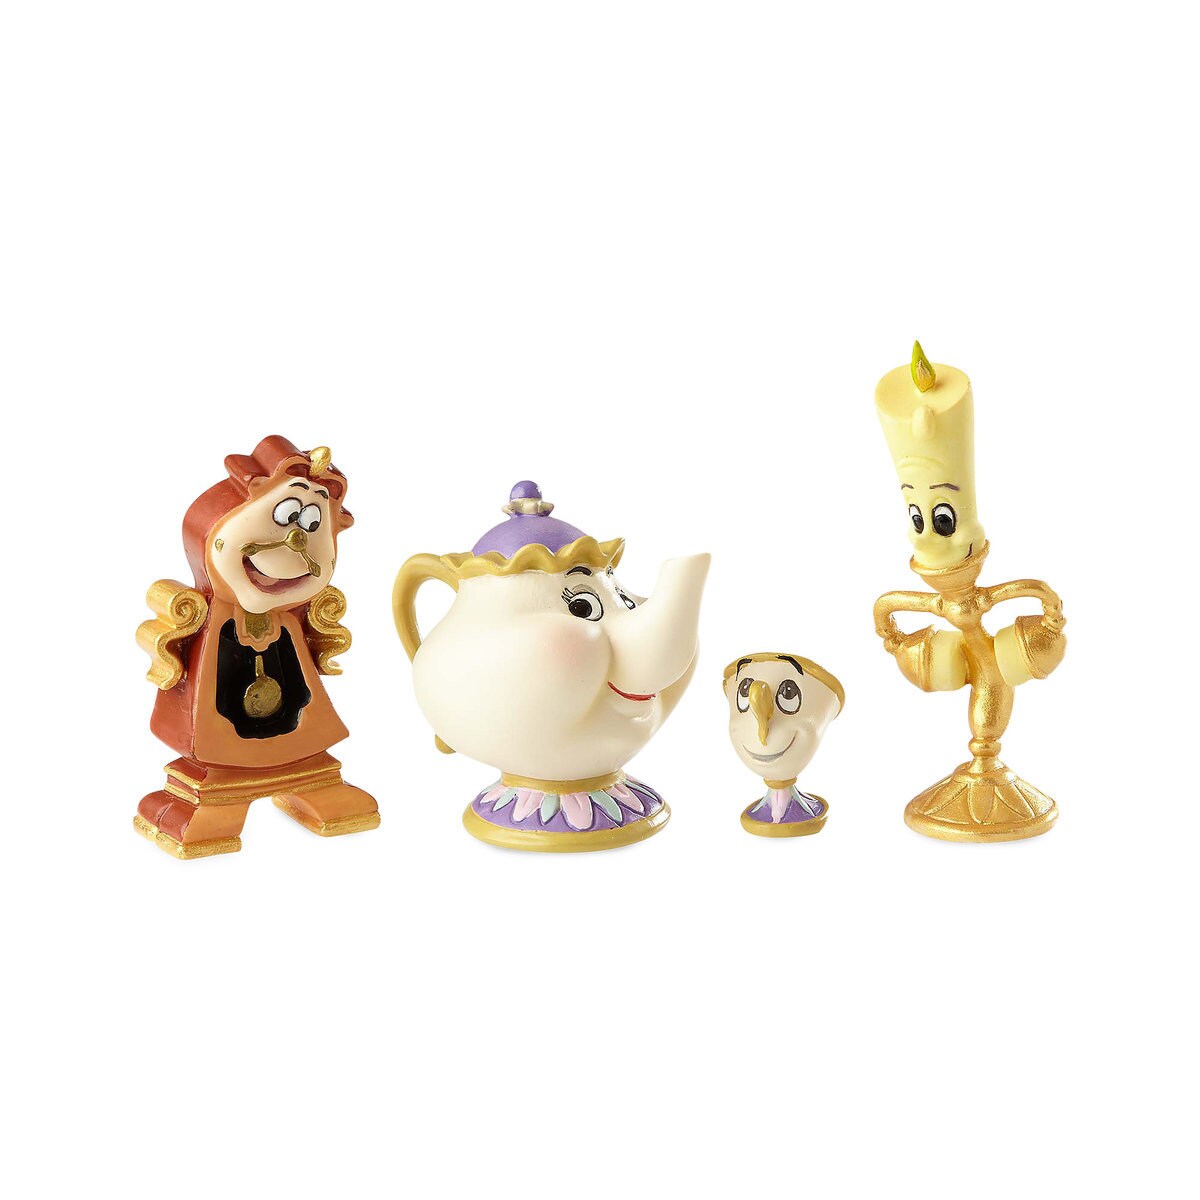 Product Image of Enchanted Objects Couture de Force Figure Set by Enesco - Beauty and the Beast # 1